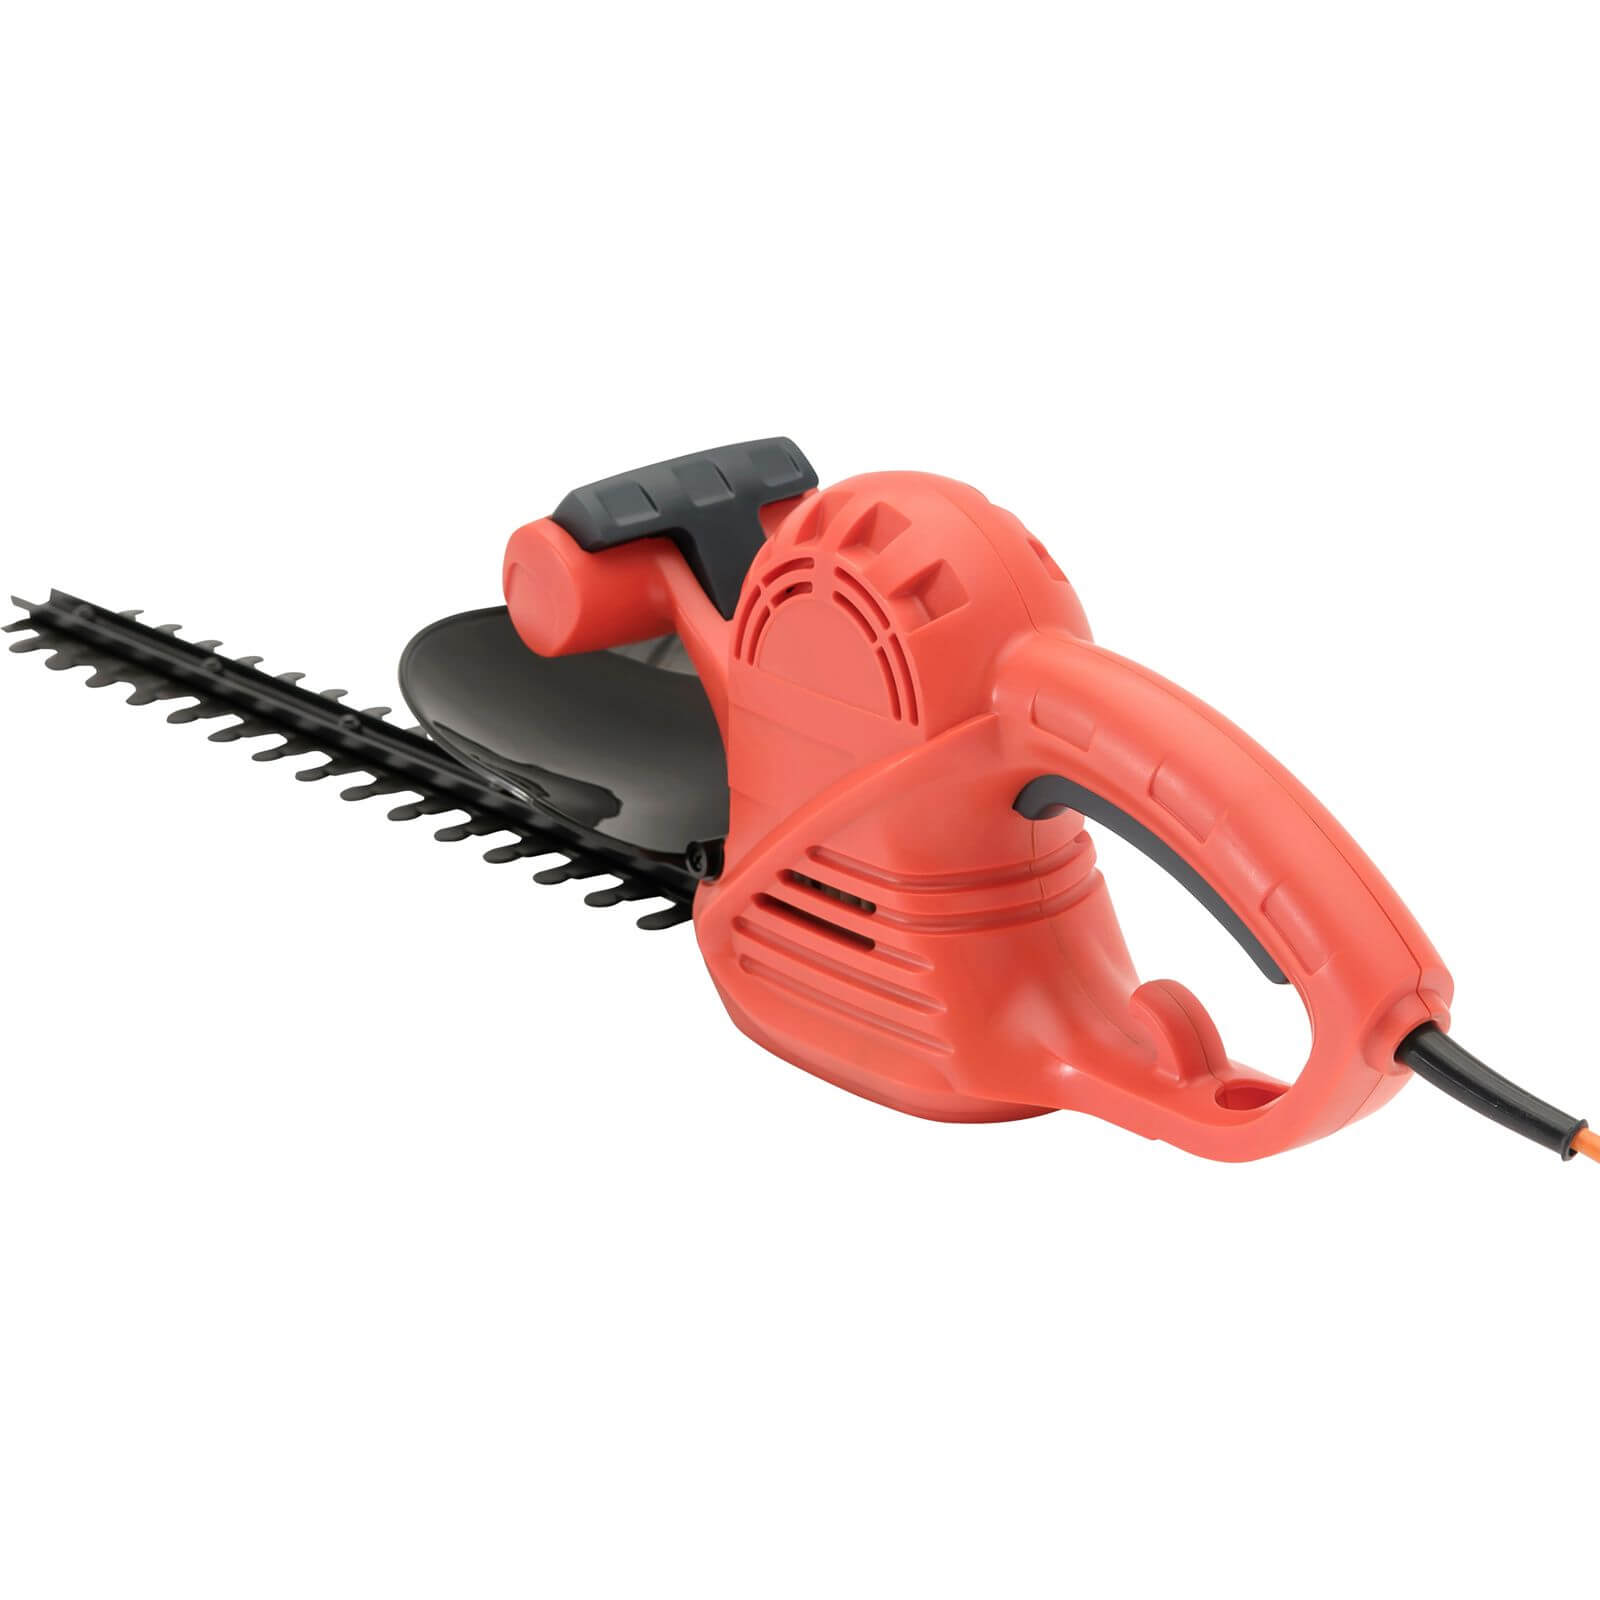 Sovereign 400W Electric Hedge Trimmer